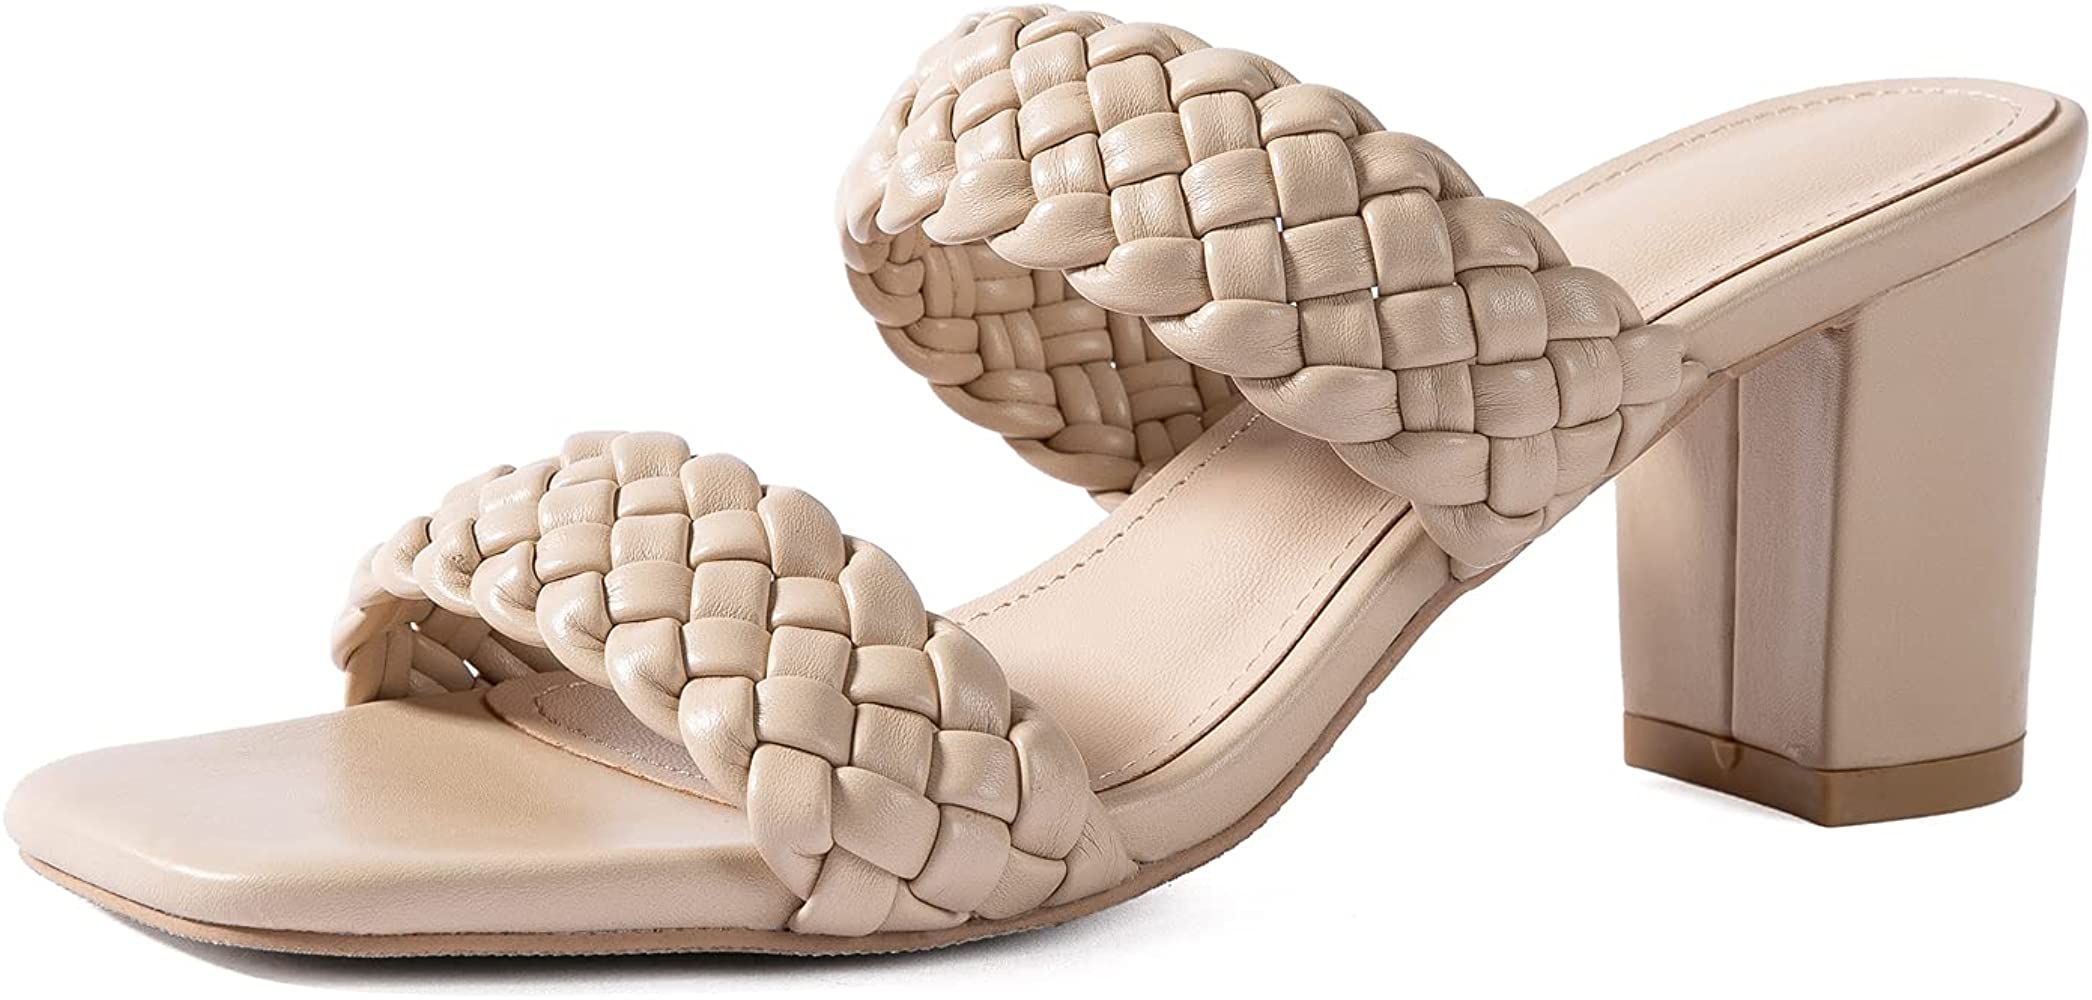 Women Heels Sandals Woven Chunky Heels Braided Nude Square Toes Leather Comfortable Strappy Dress Ca | Amazon (US)